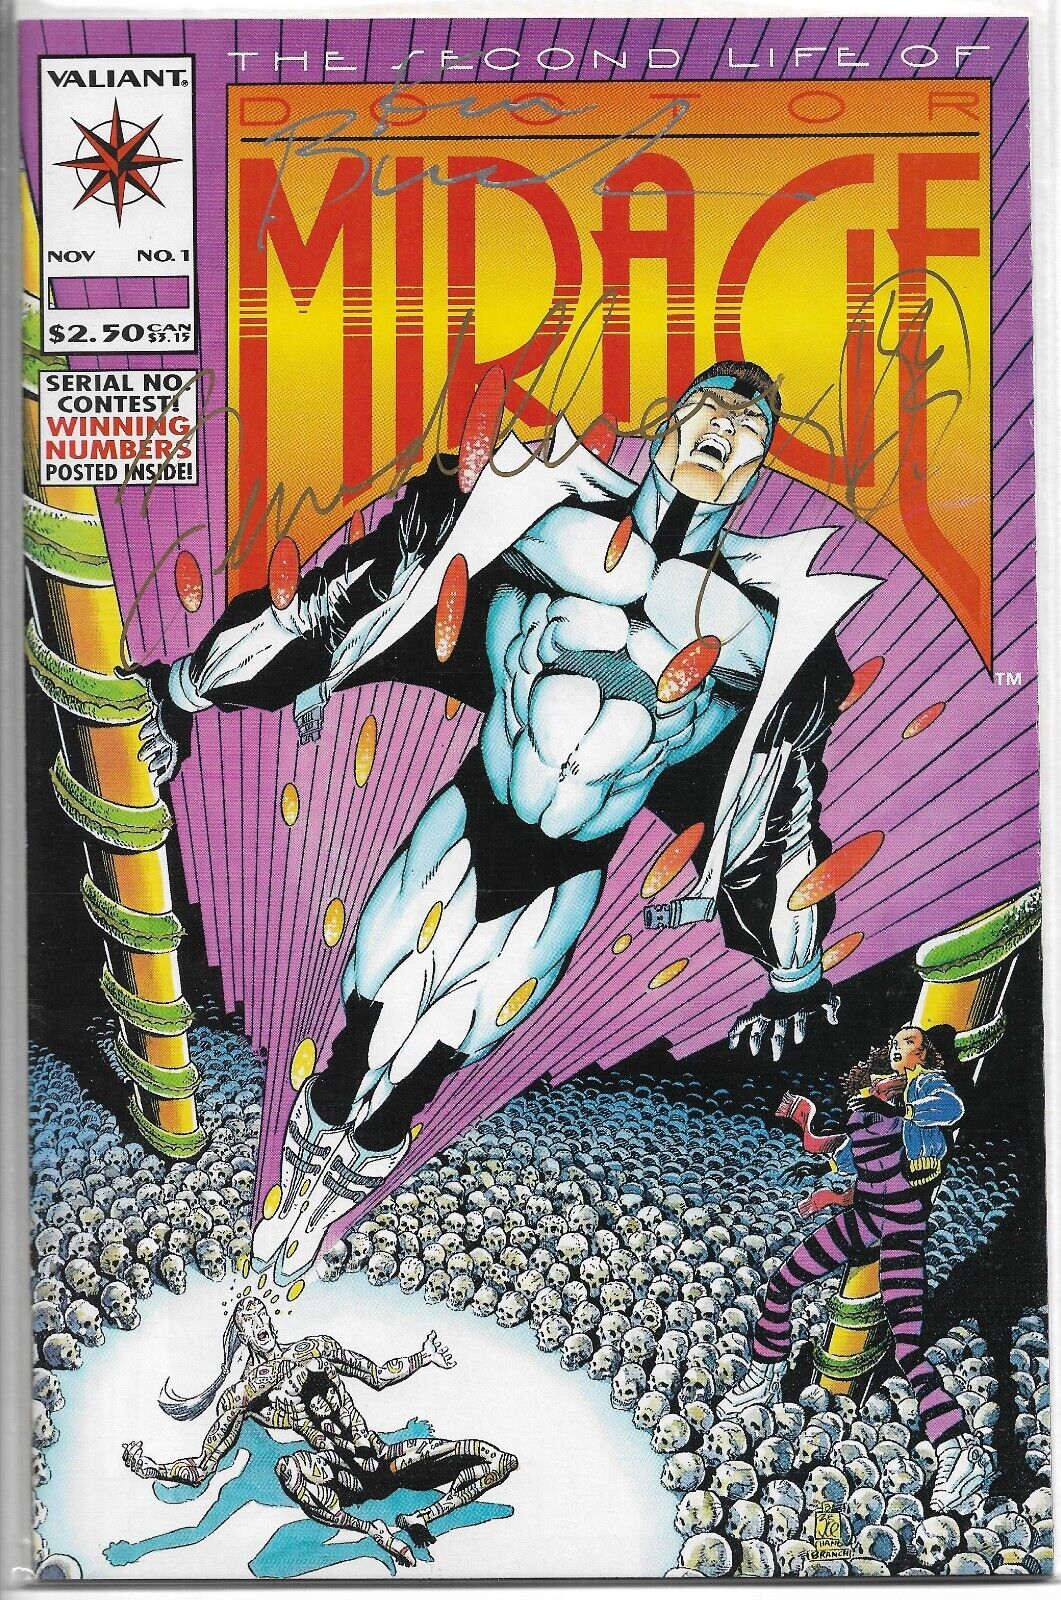 Second Life of Doctor Mirage #1 Valiant Signed Bernard Chang incl Hero Illus.#1